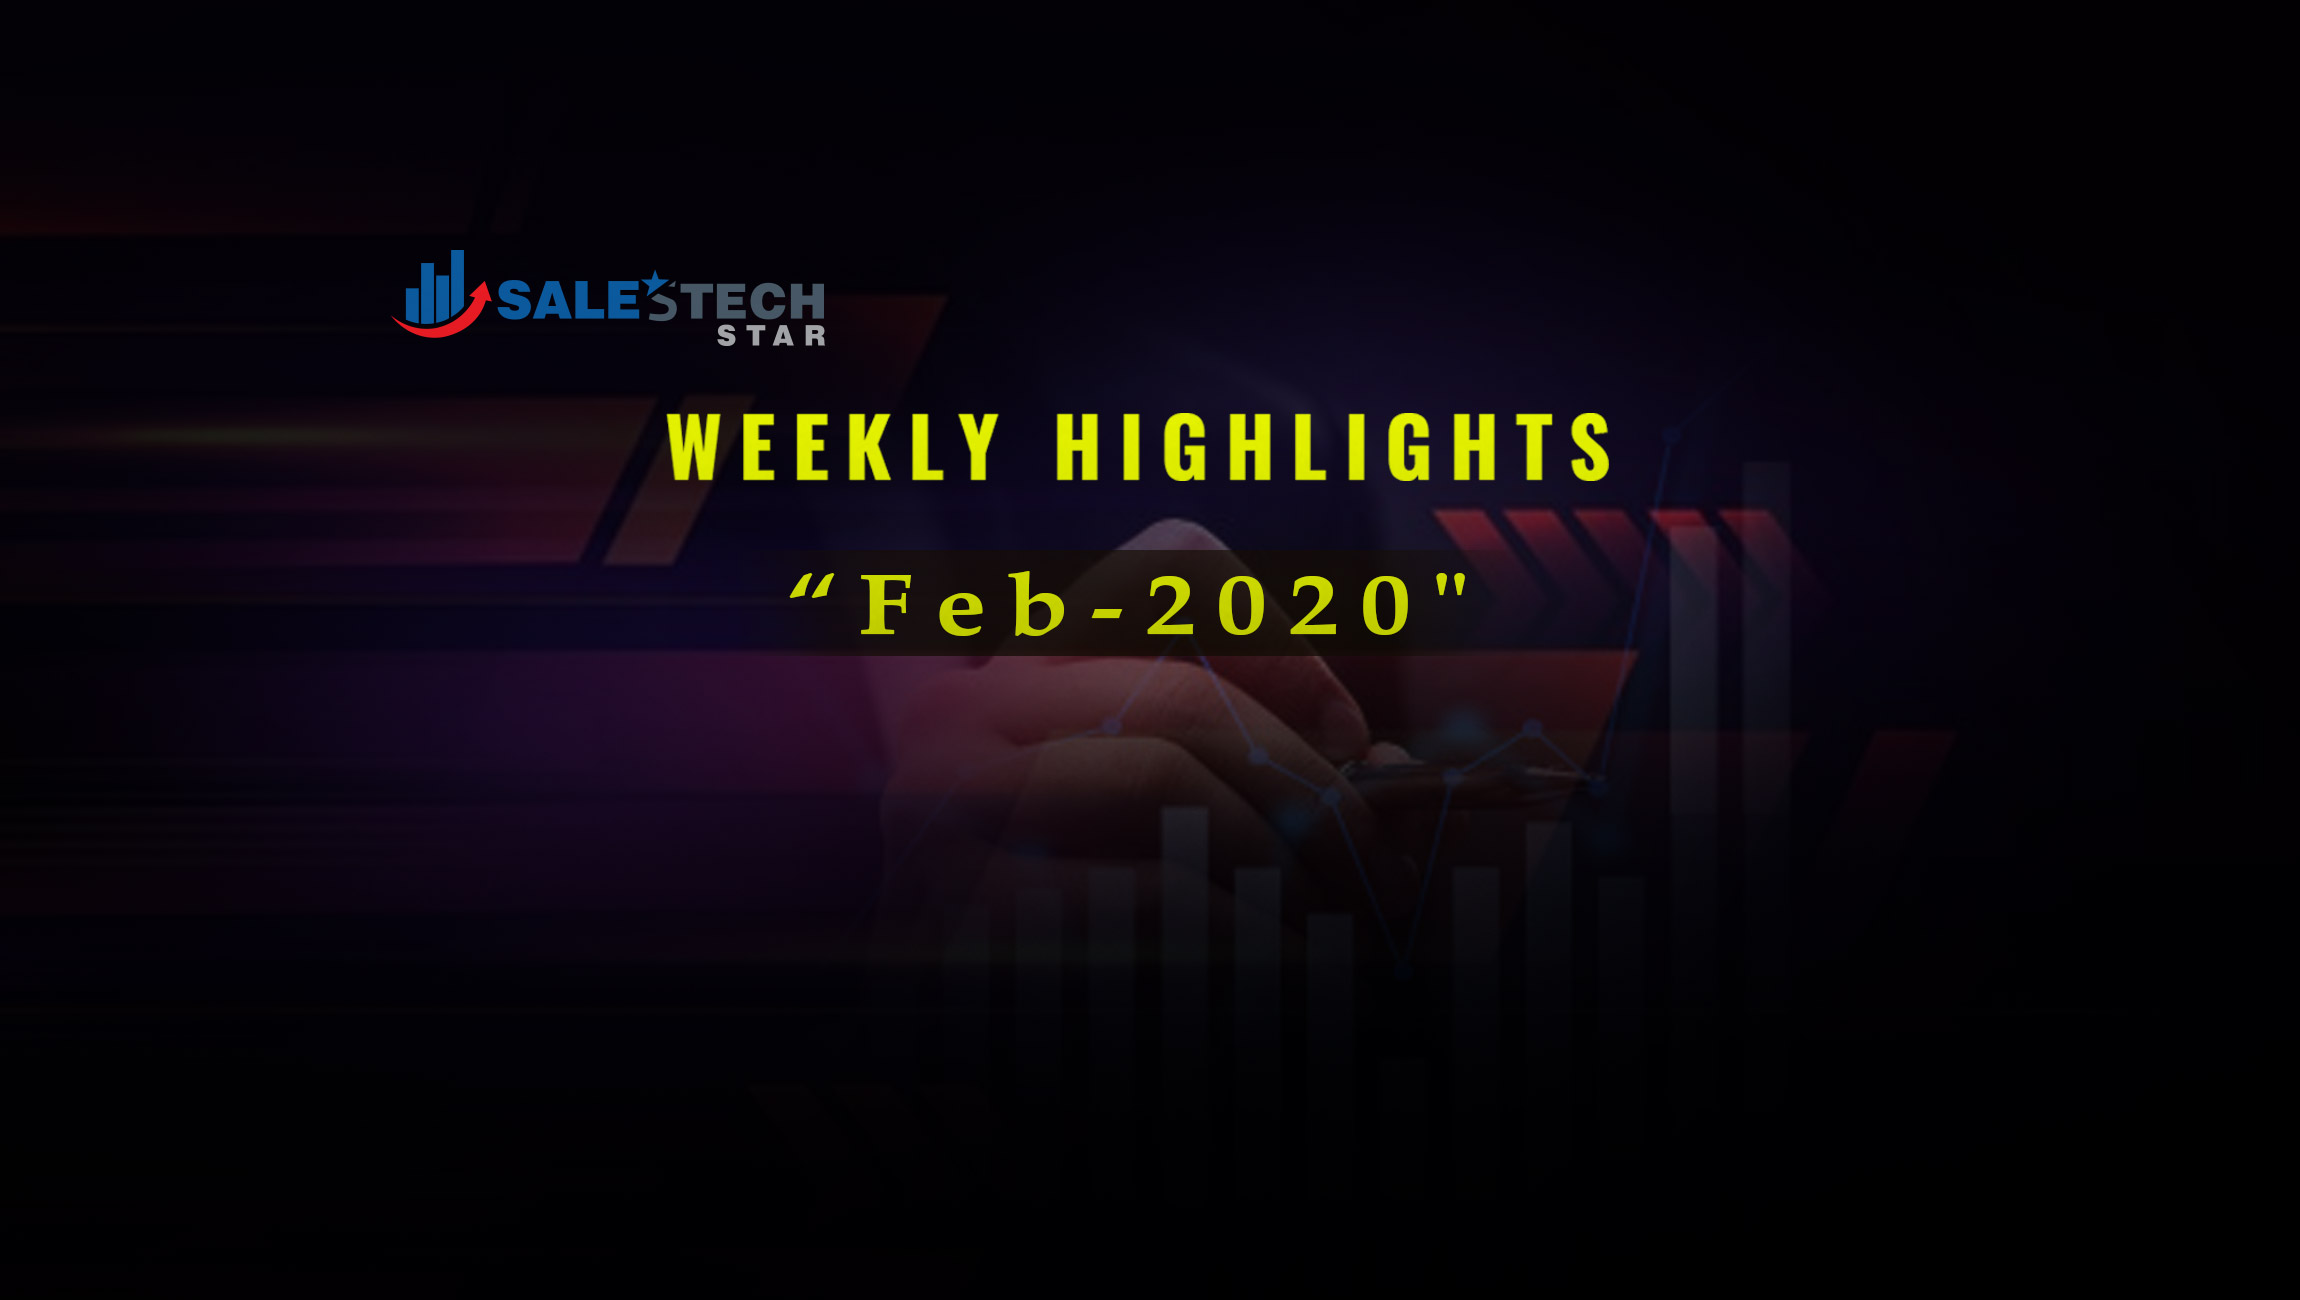 Top SalesTech News Of The Week - 3rd February 2020 - Feat. - News from Allego, Hushly, Aquaint, and More